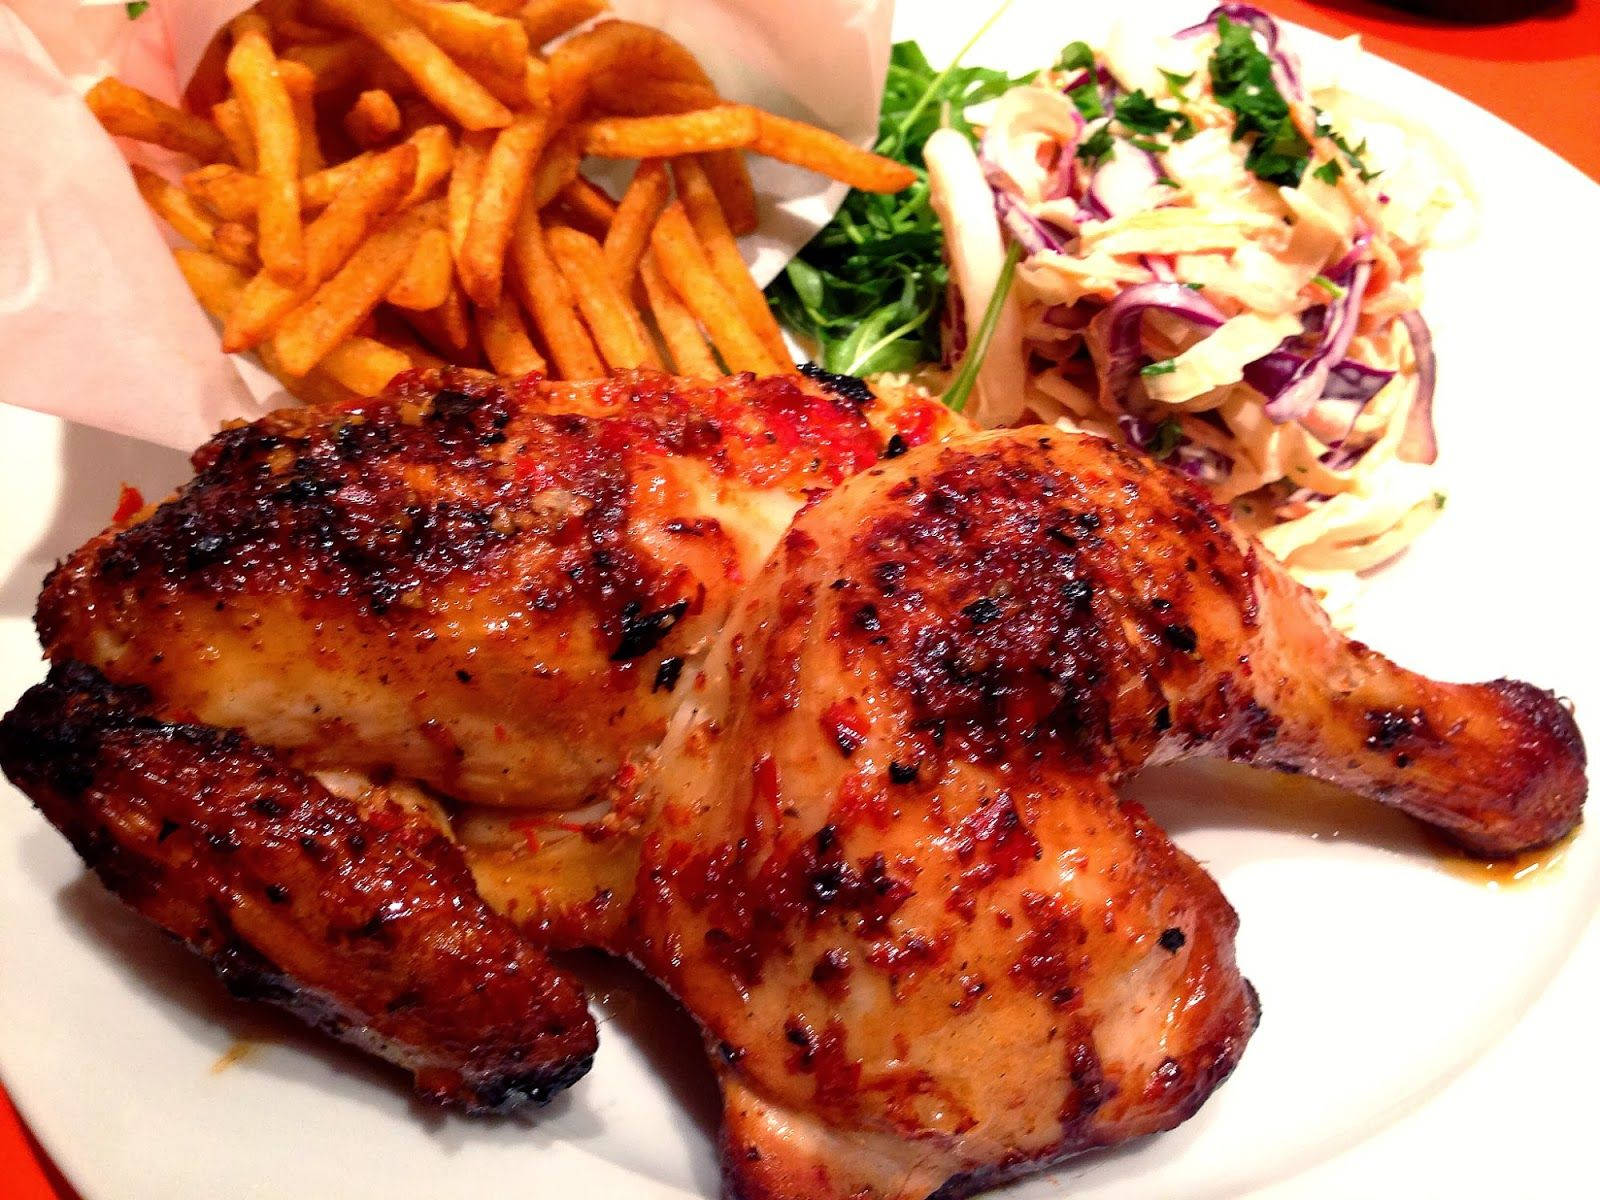 Scrumptious Peri Peri Chicken With Coleslaw And Fries Wallpaper